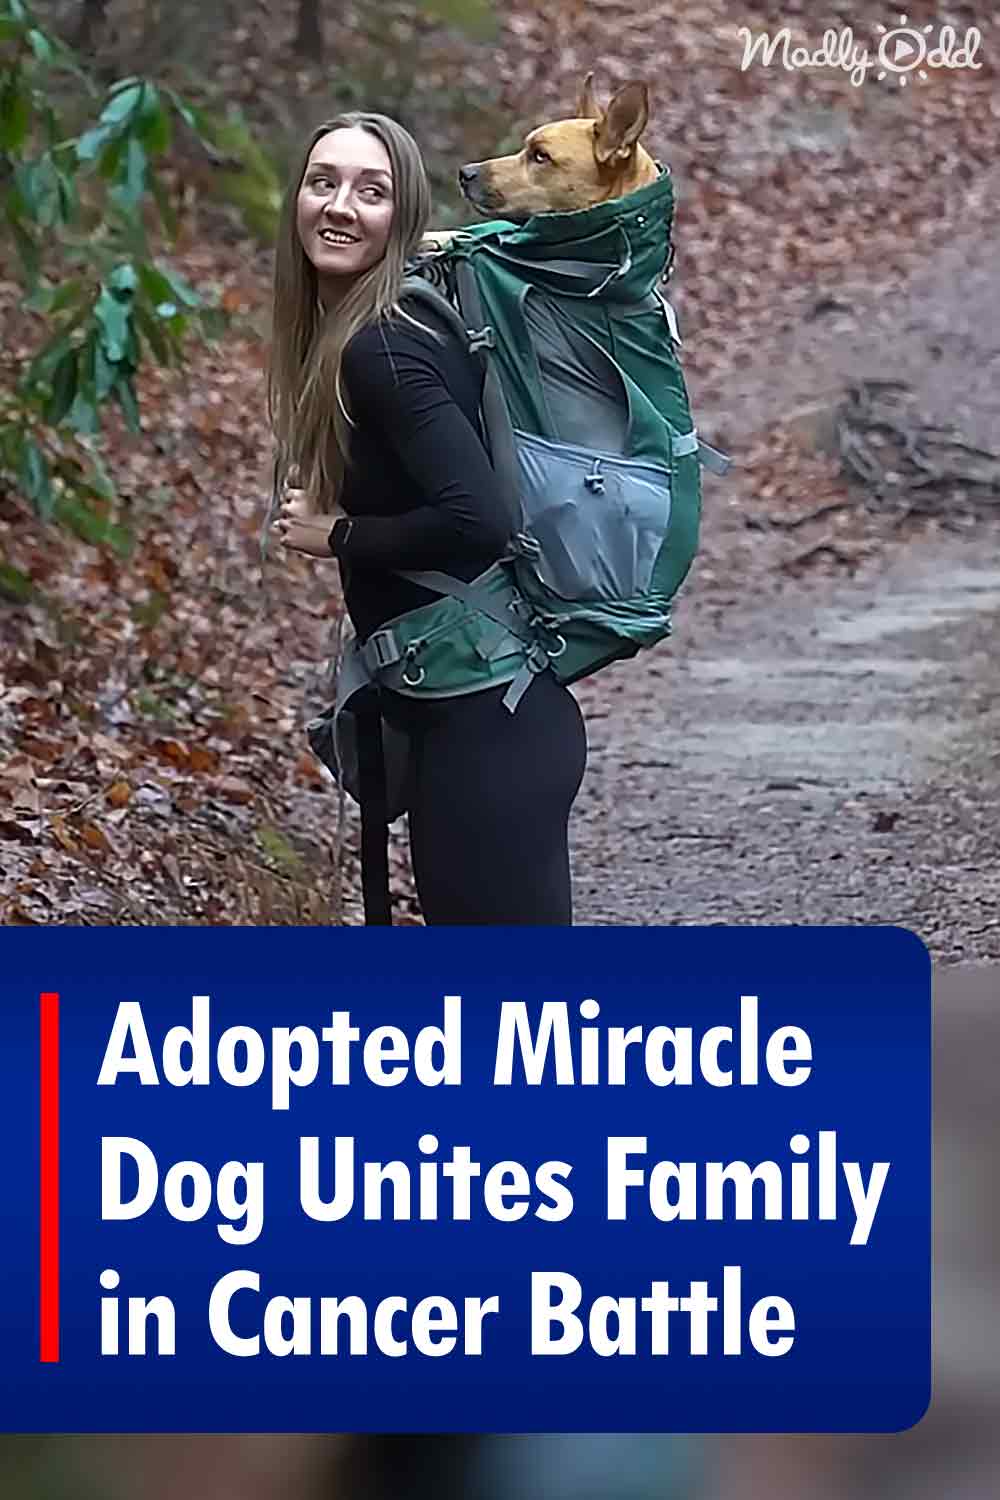 Adopted Miracle Dog Unites Family in Cancer Battle